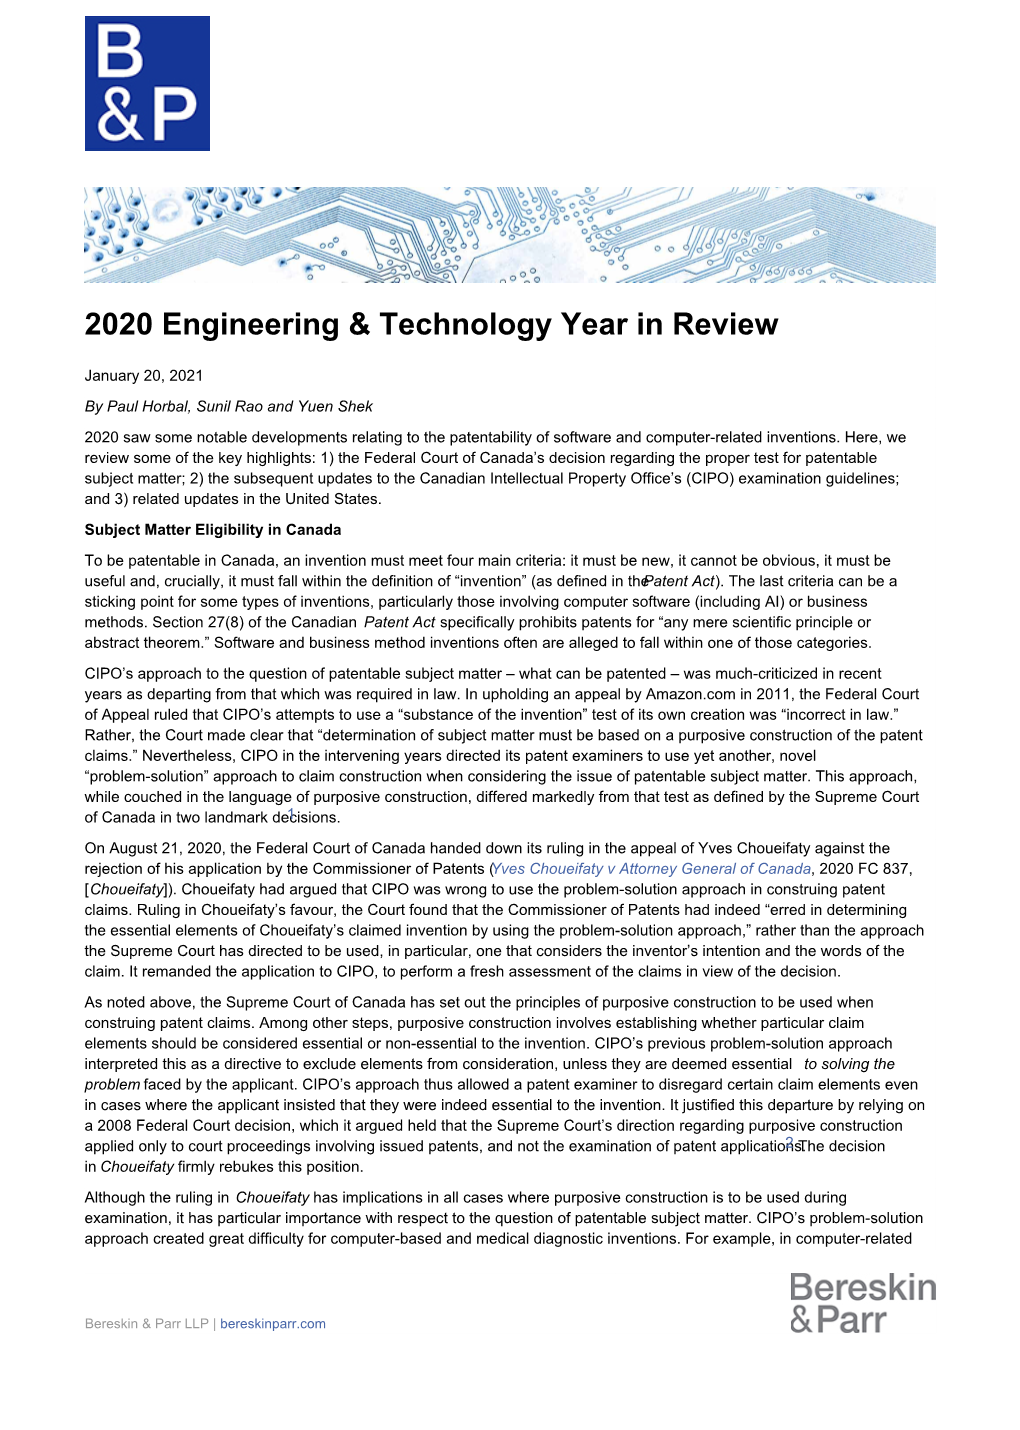 2020 Engineering & Technology Year in Review